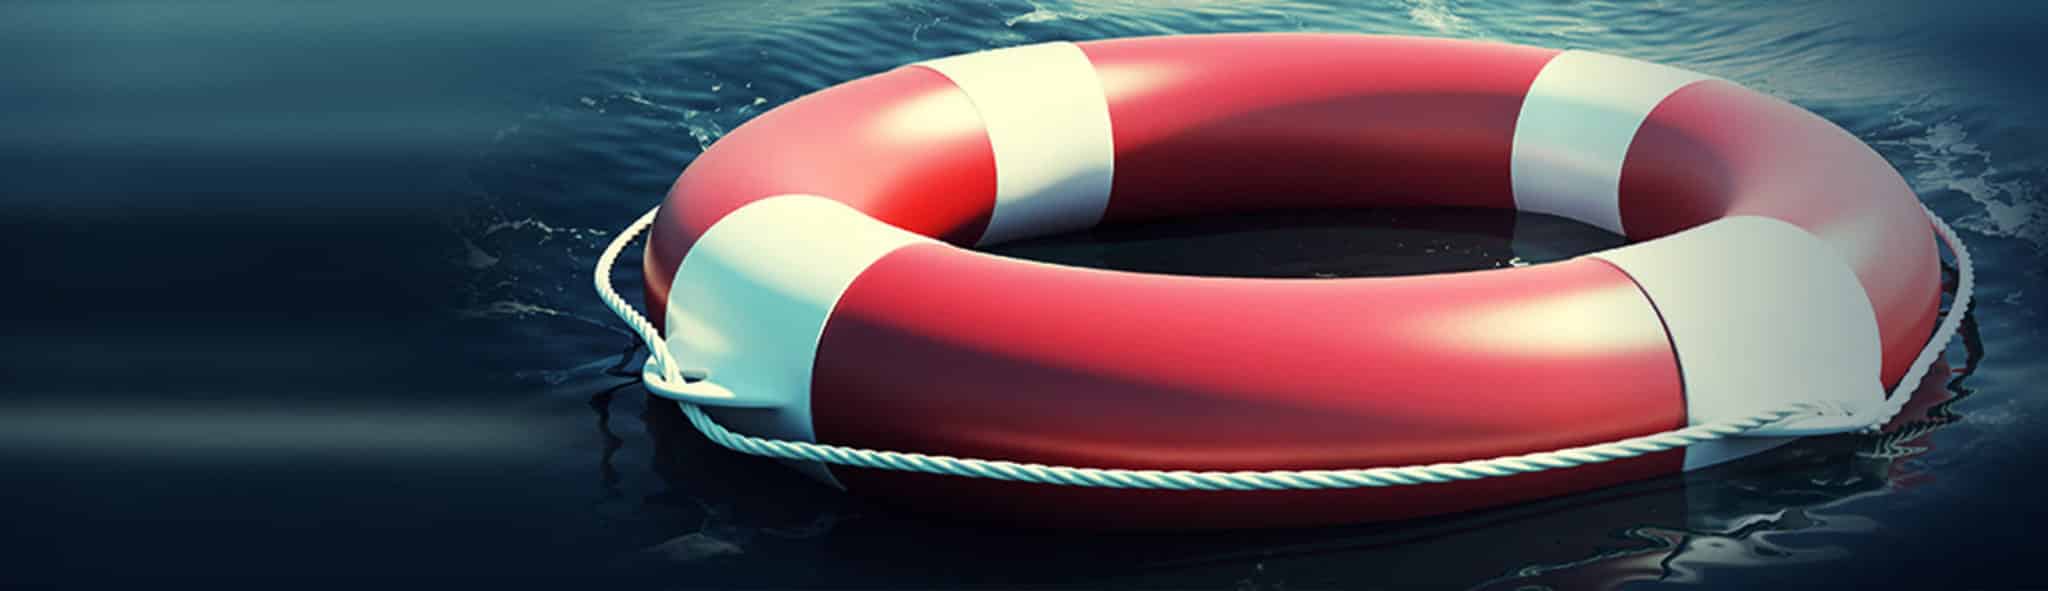 Howie, Sacks & Henry LLP – Personal Injury Law – Boat Accidents